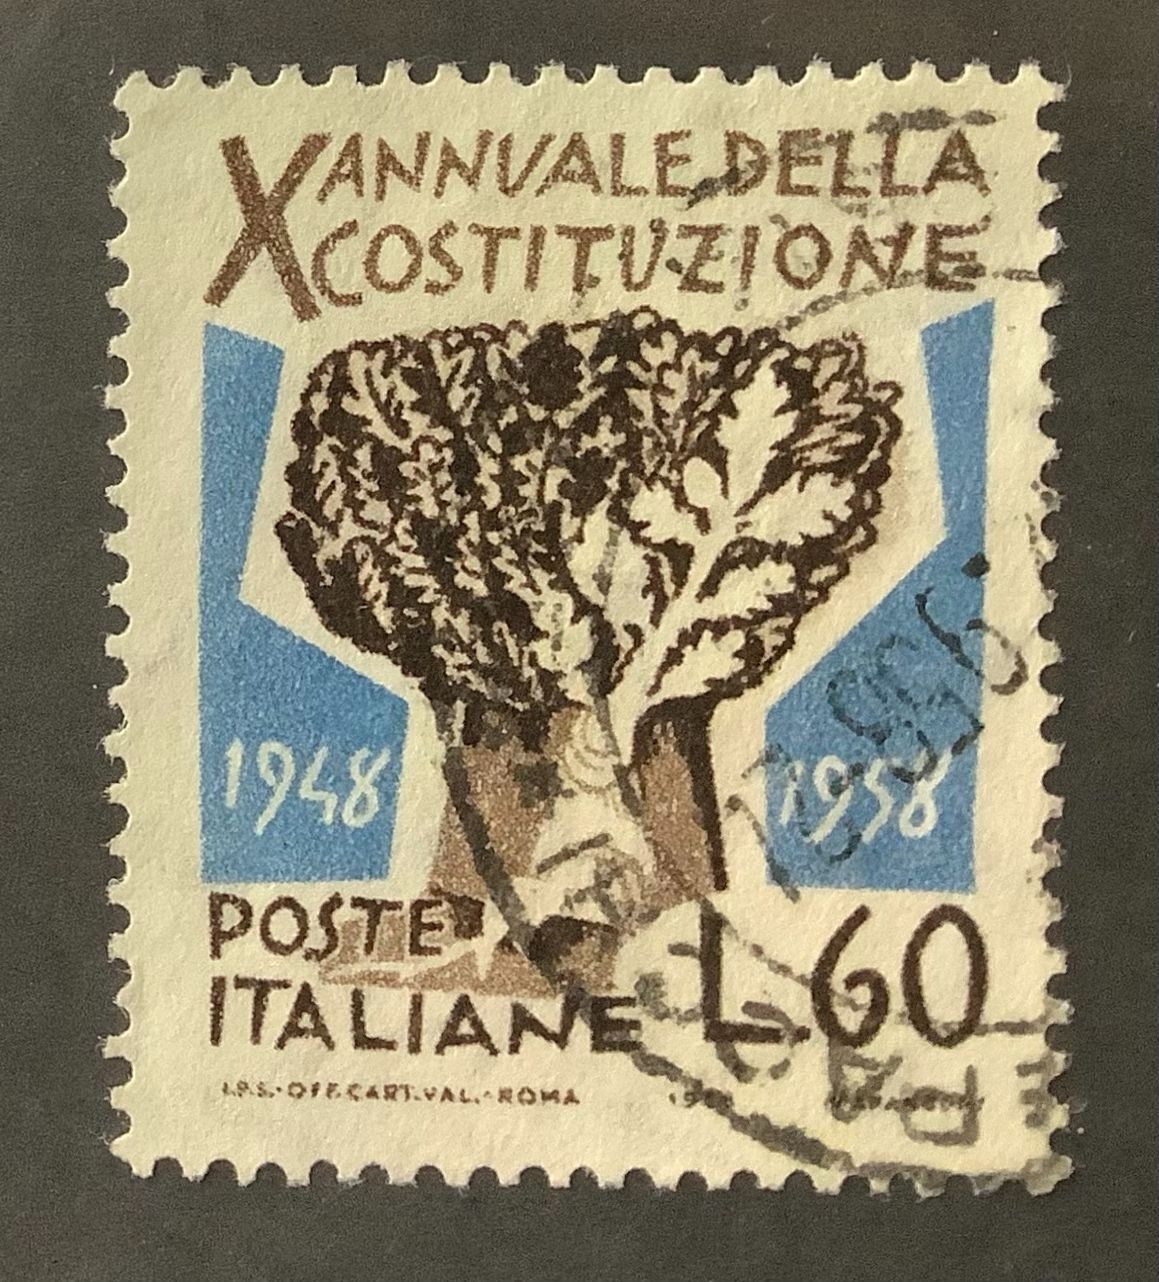 Italy 1958 Scott 742 used - 60 l, 10th Anniversary of the Constitution 